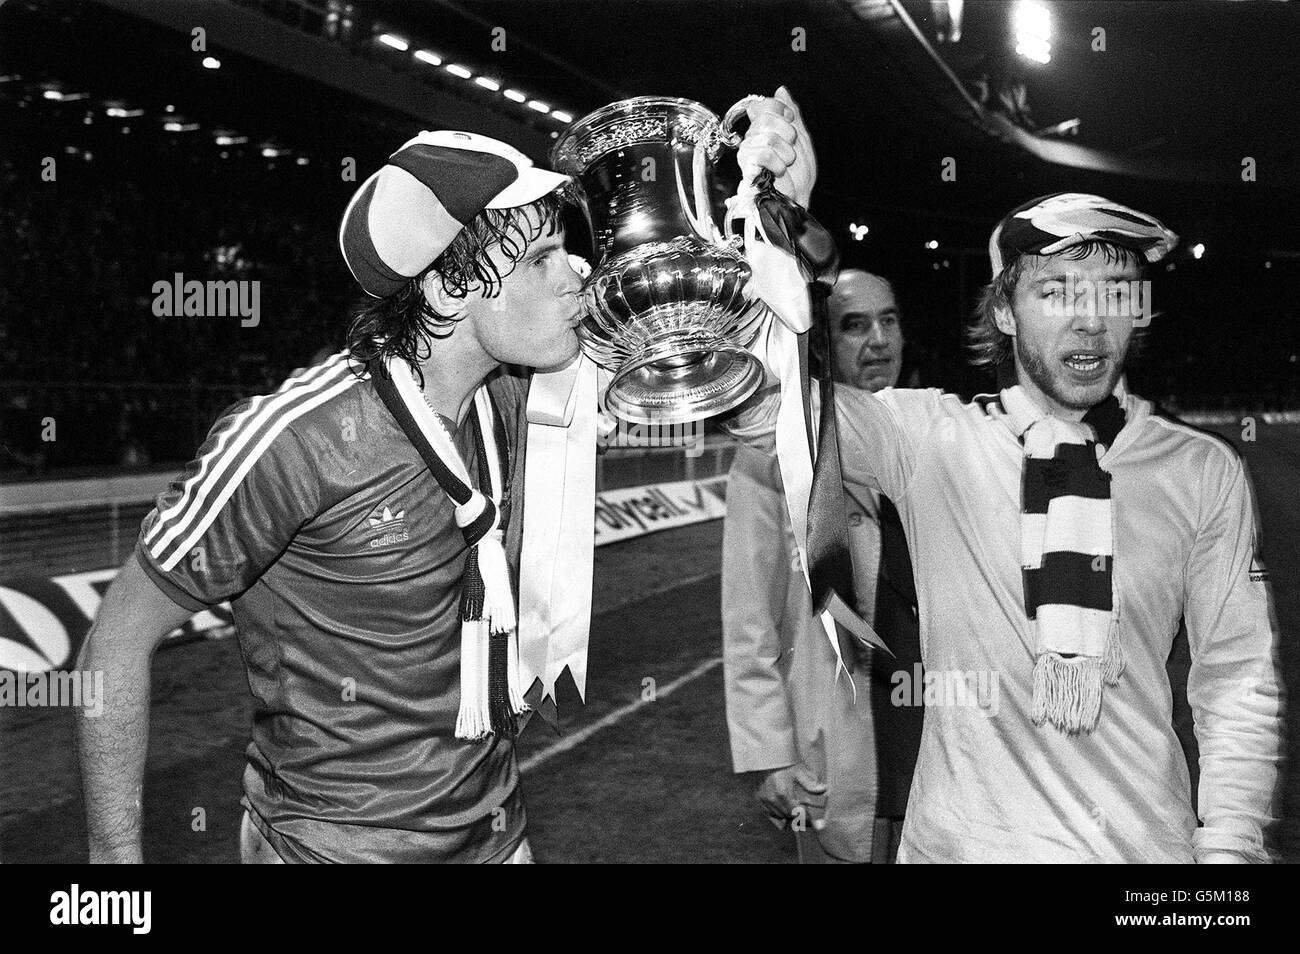 Tottenham's Glenn Hoddle kisses the cup as he and Steve Archibald take it on a lap of honour after defeating Queen's Park Rangers 1-0 in the FA Cup final. Stock Photo